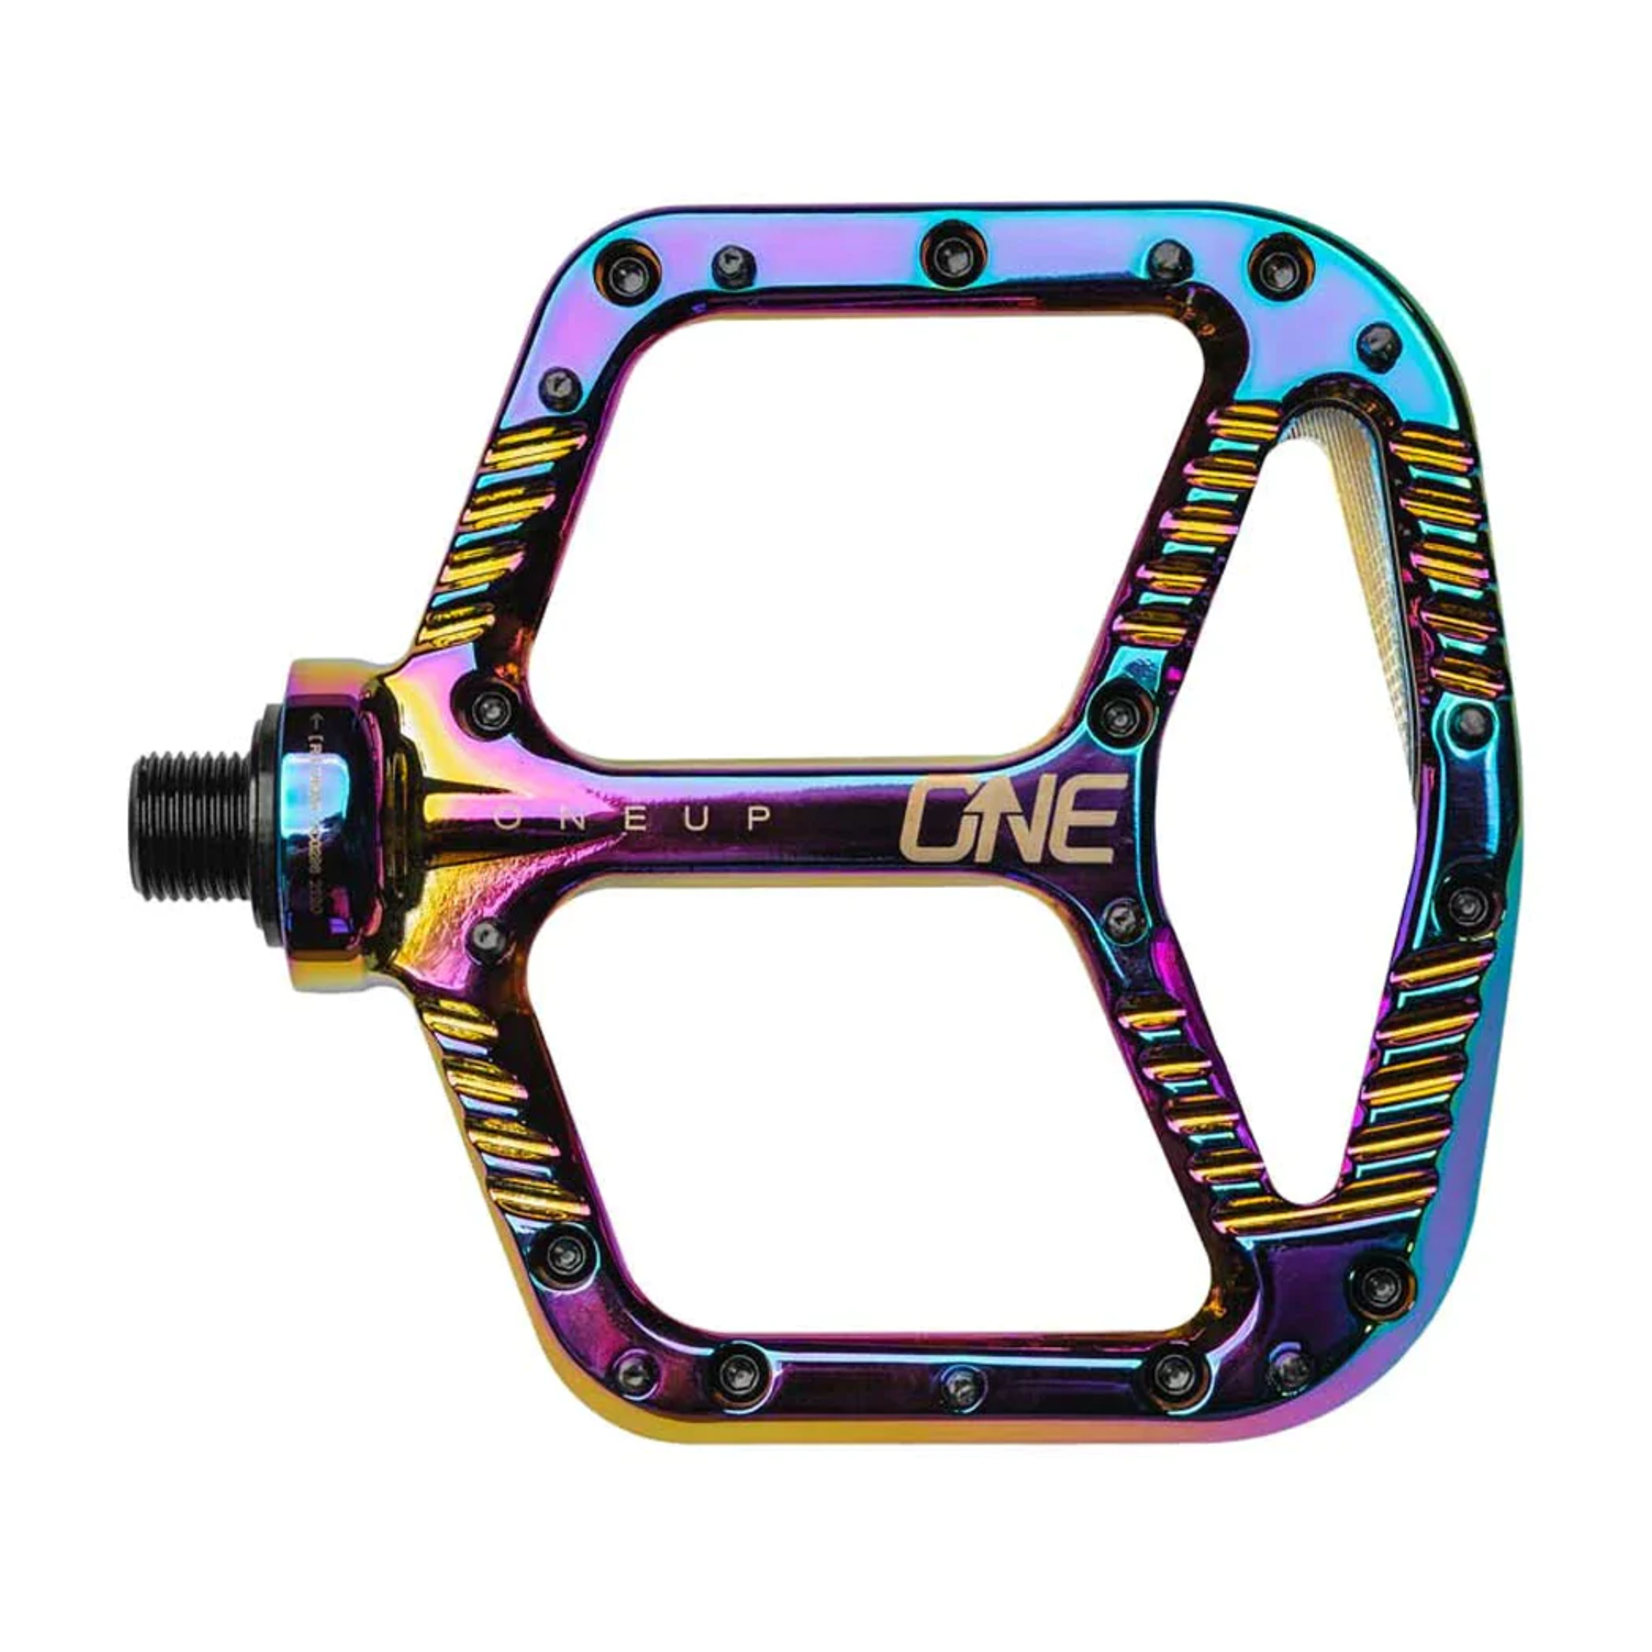 One Up Components OneUp Flat Aluminum Pedals